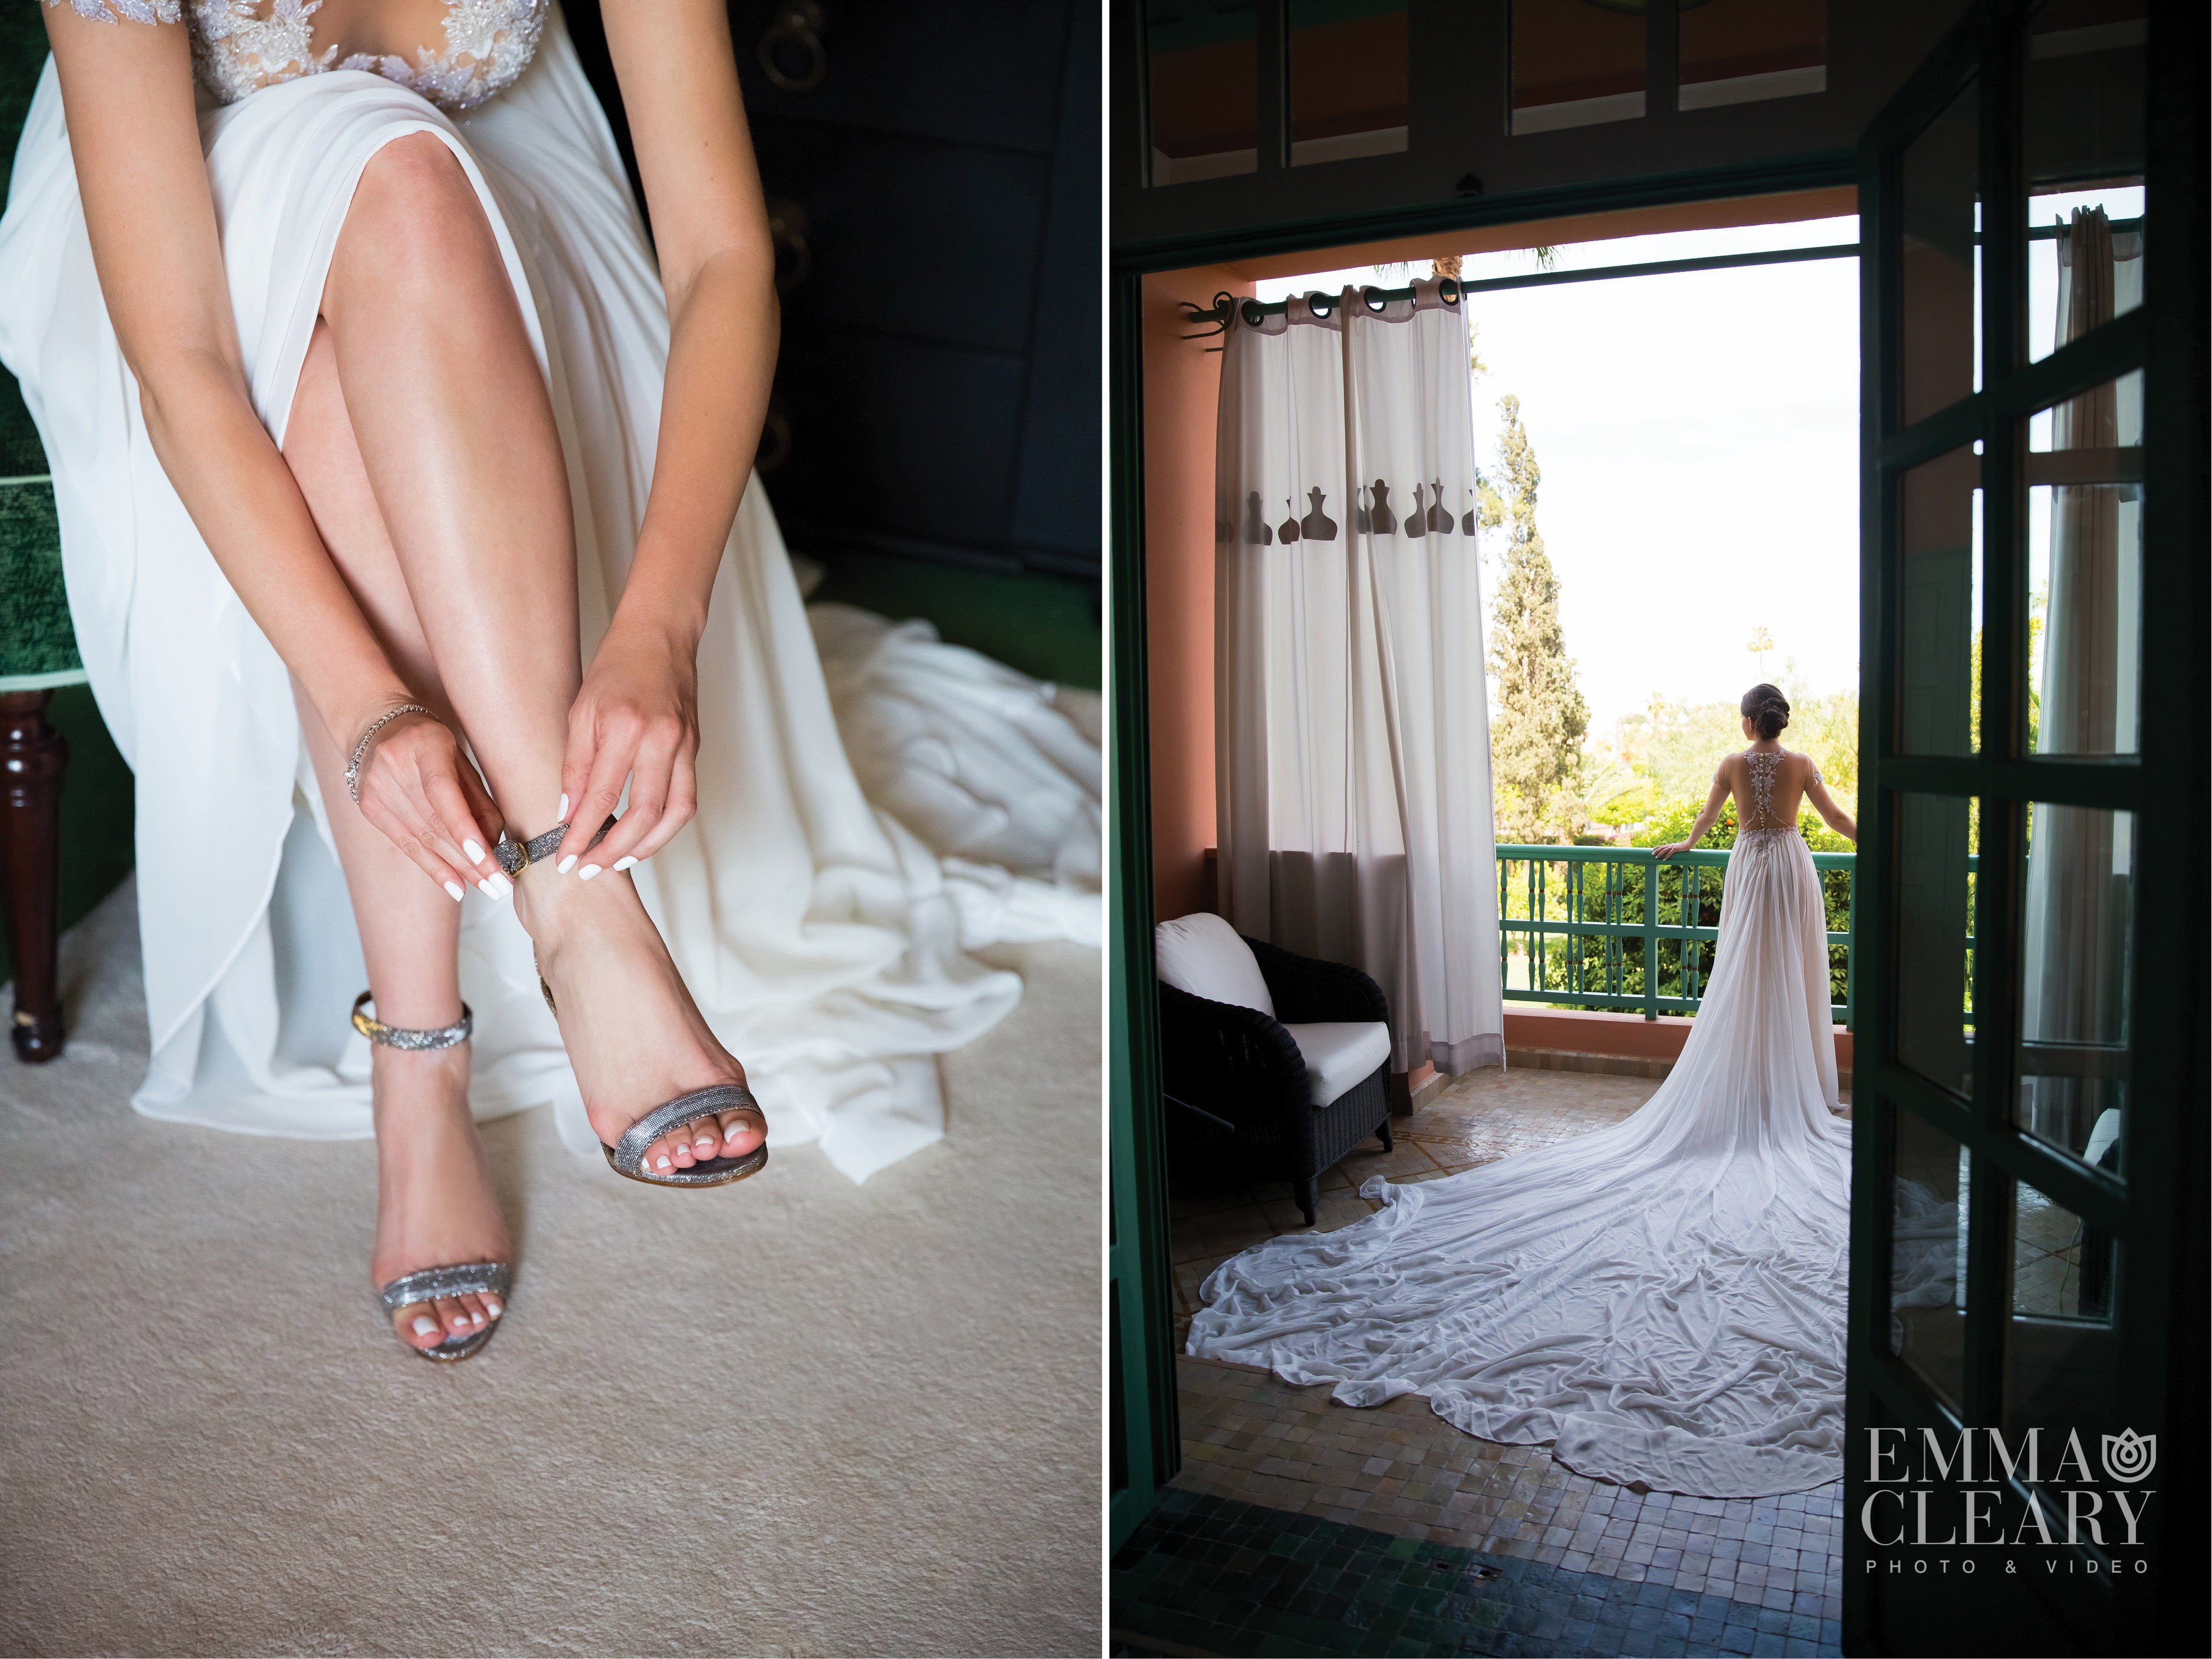 Emma_cleary_photography Destination Wedding Morrocco08